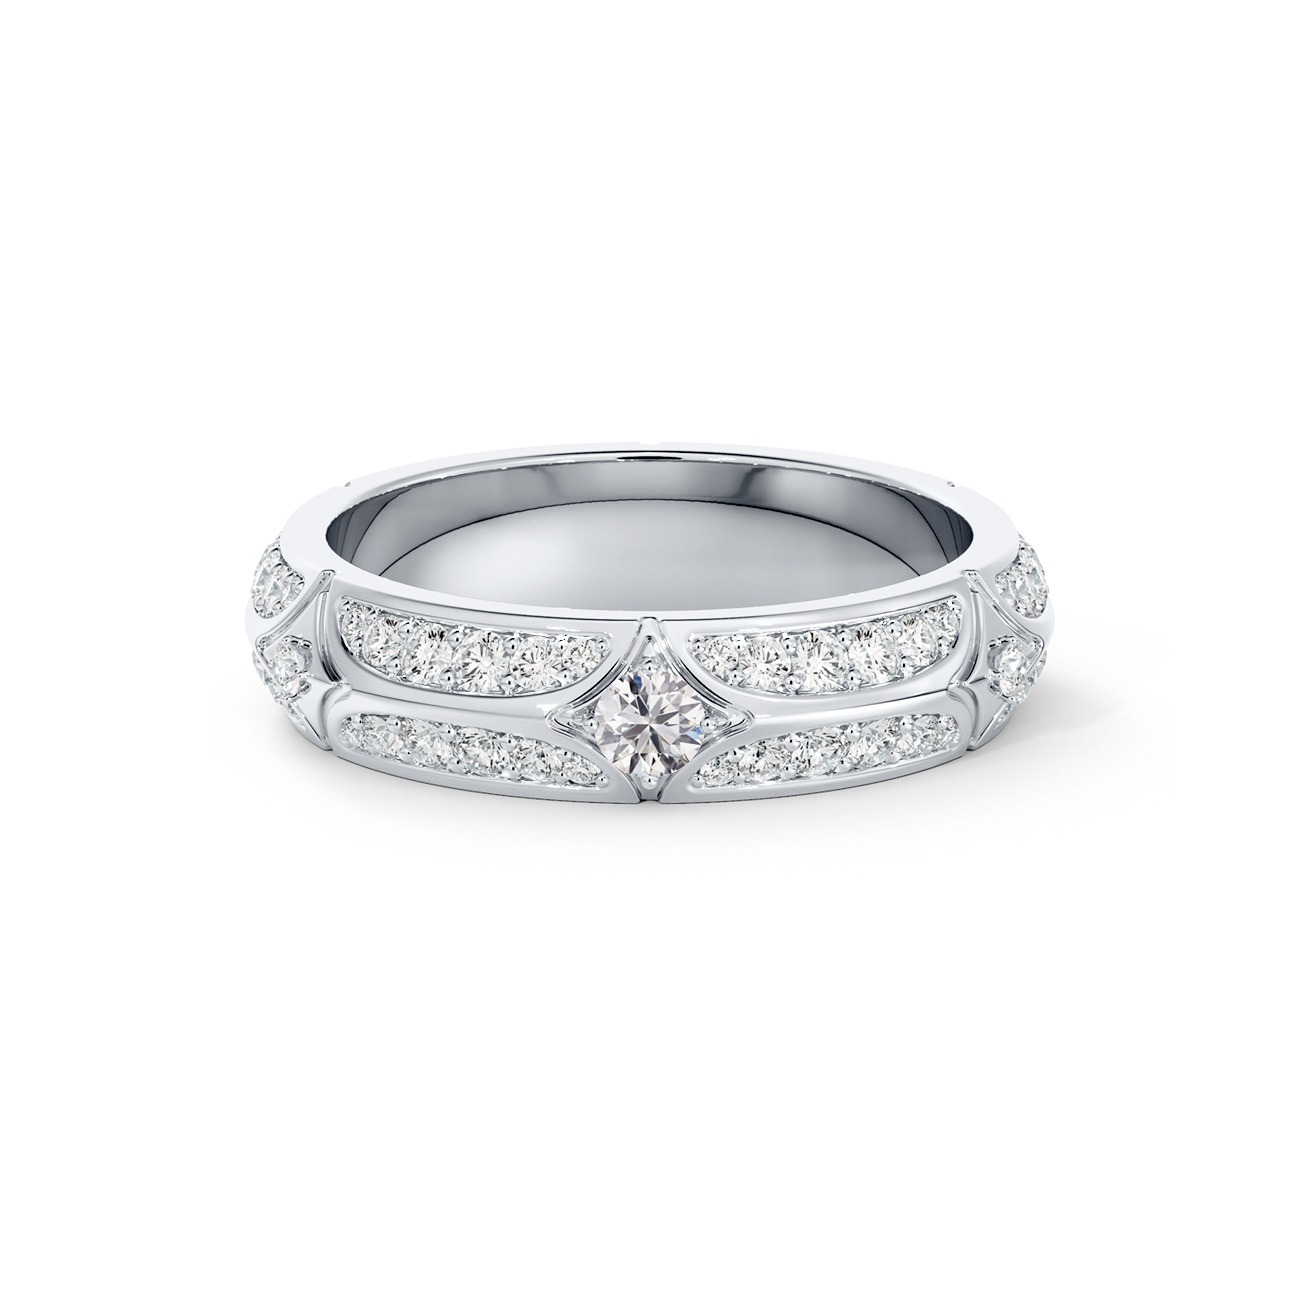 How do I take care of my white gold engagement ring?? : r/EngagementRings